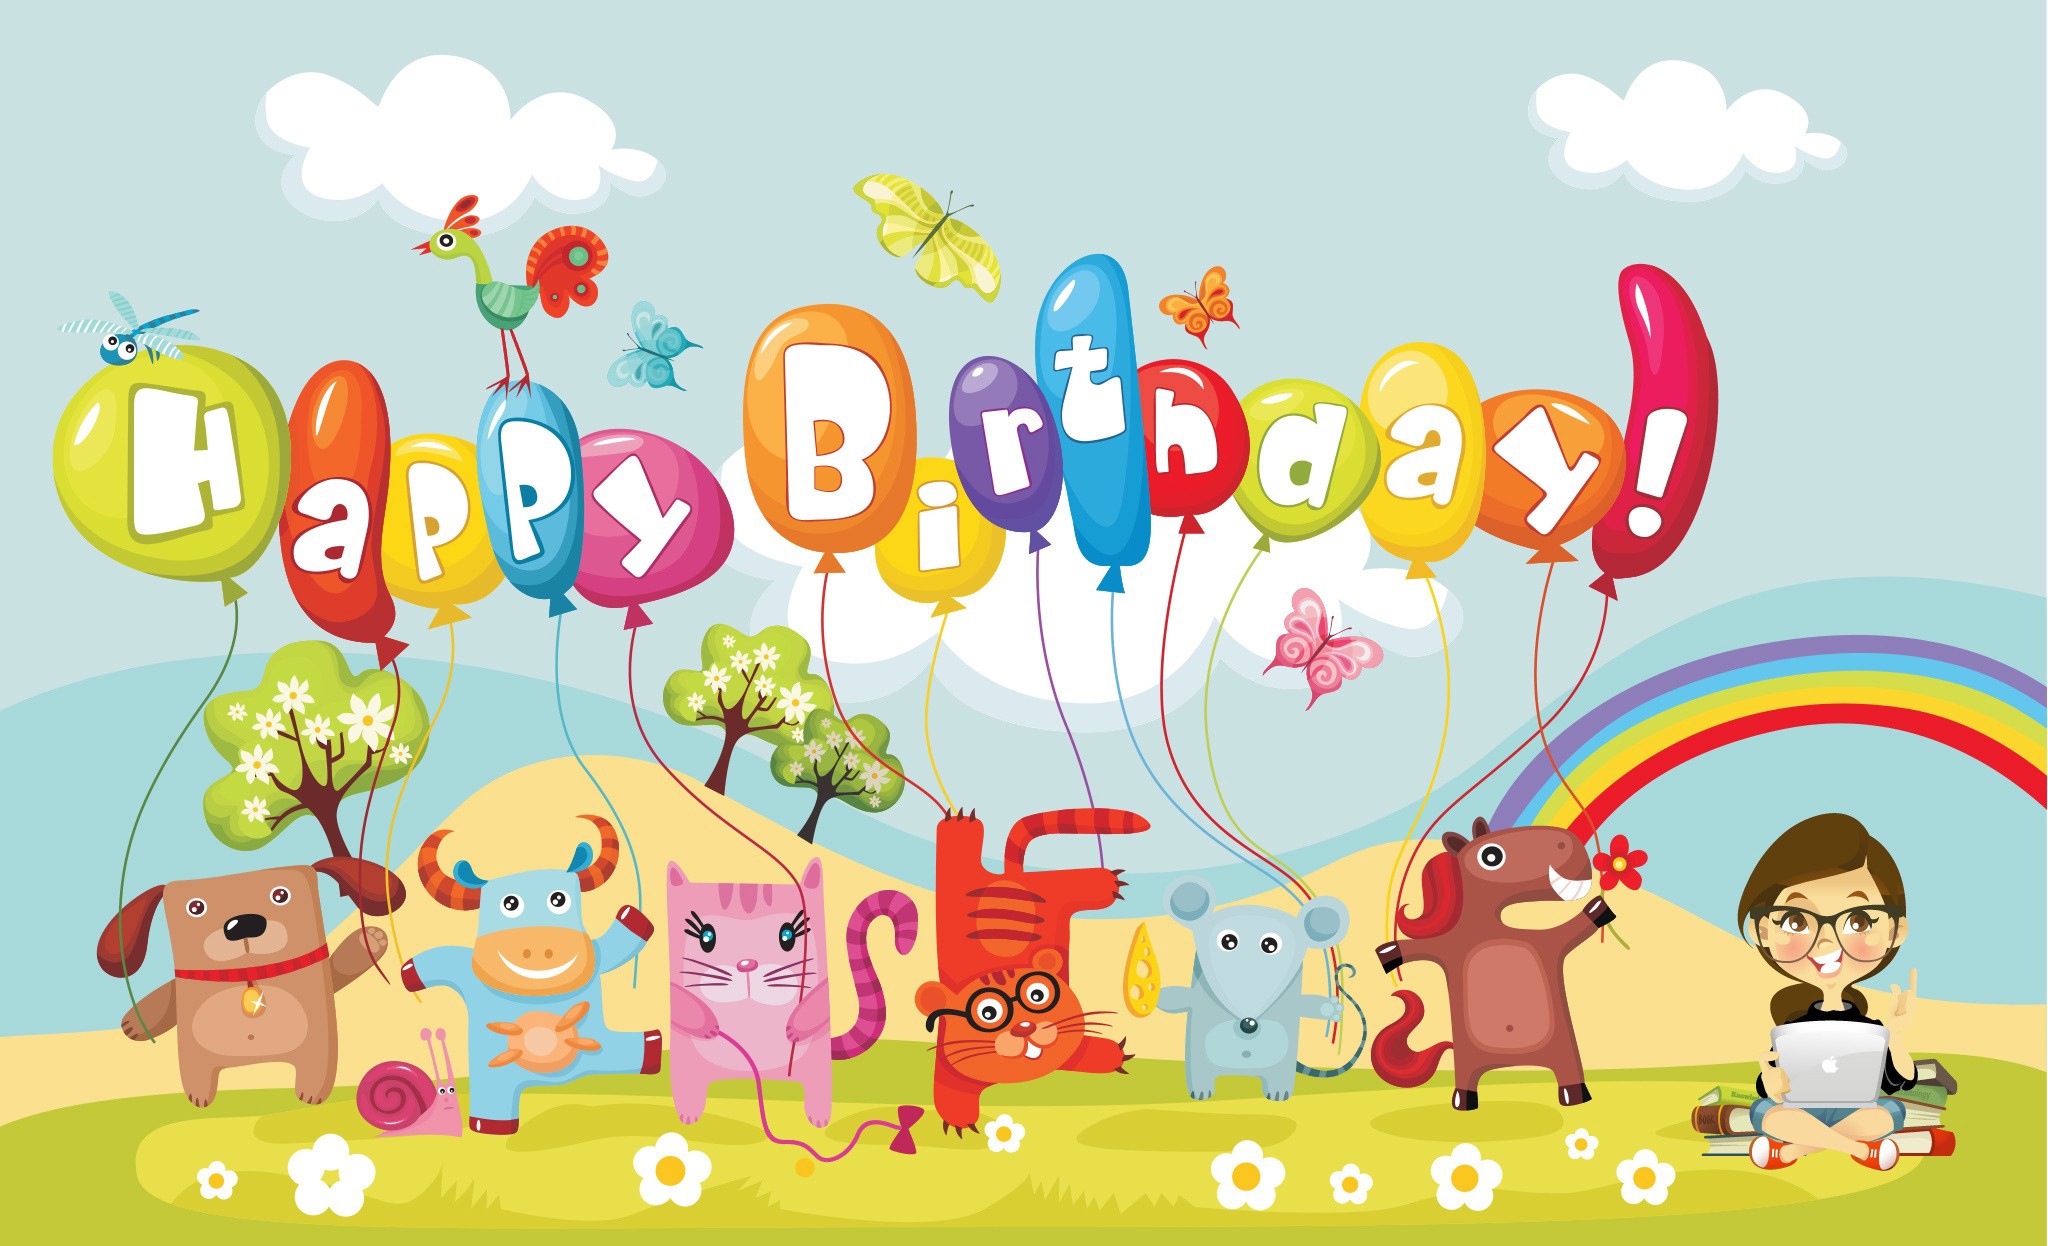 free-cliparts-birthday-party-download-free-cliparts-birthday-party-png